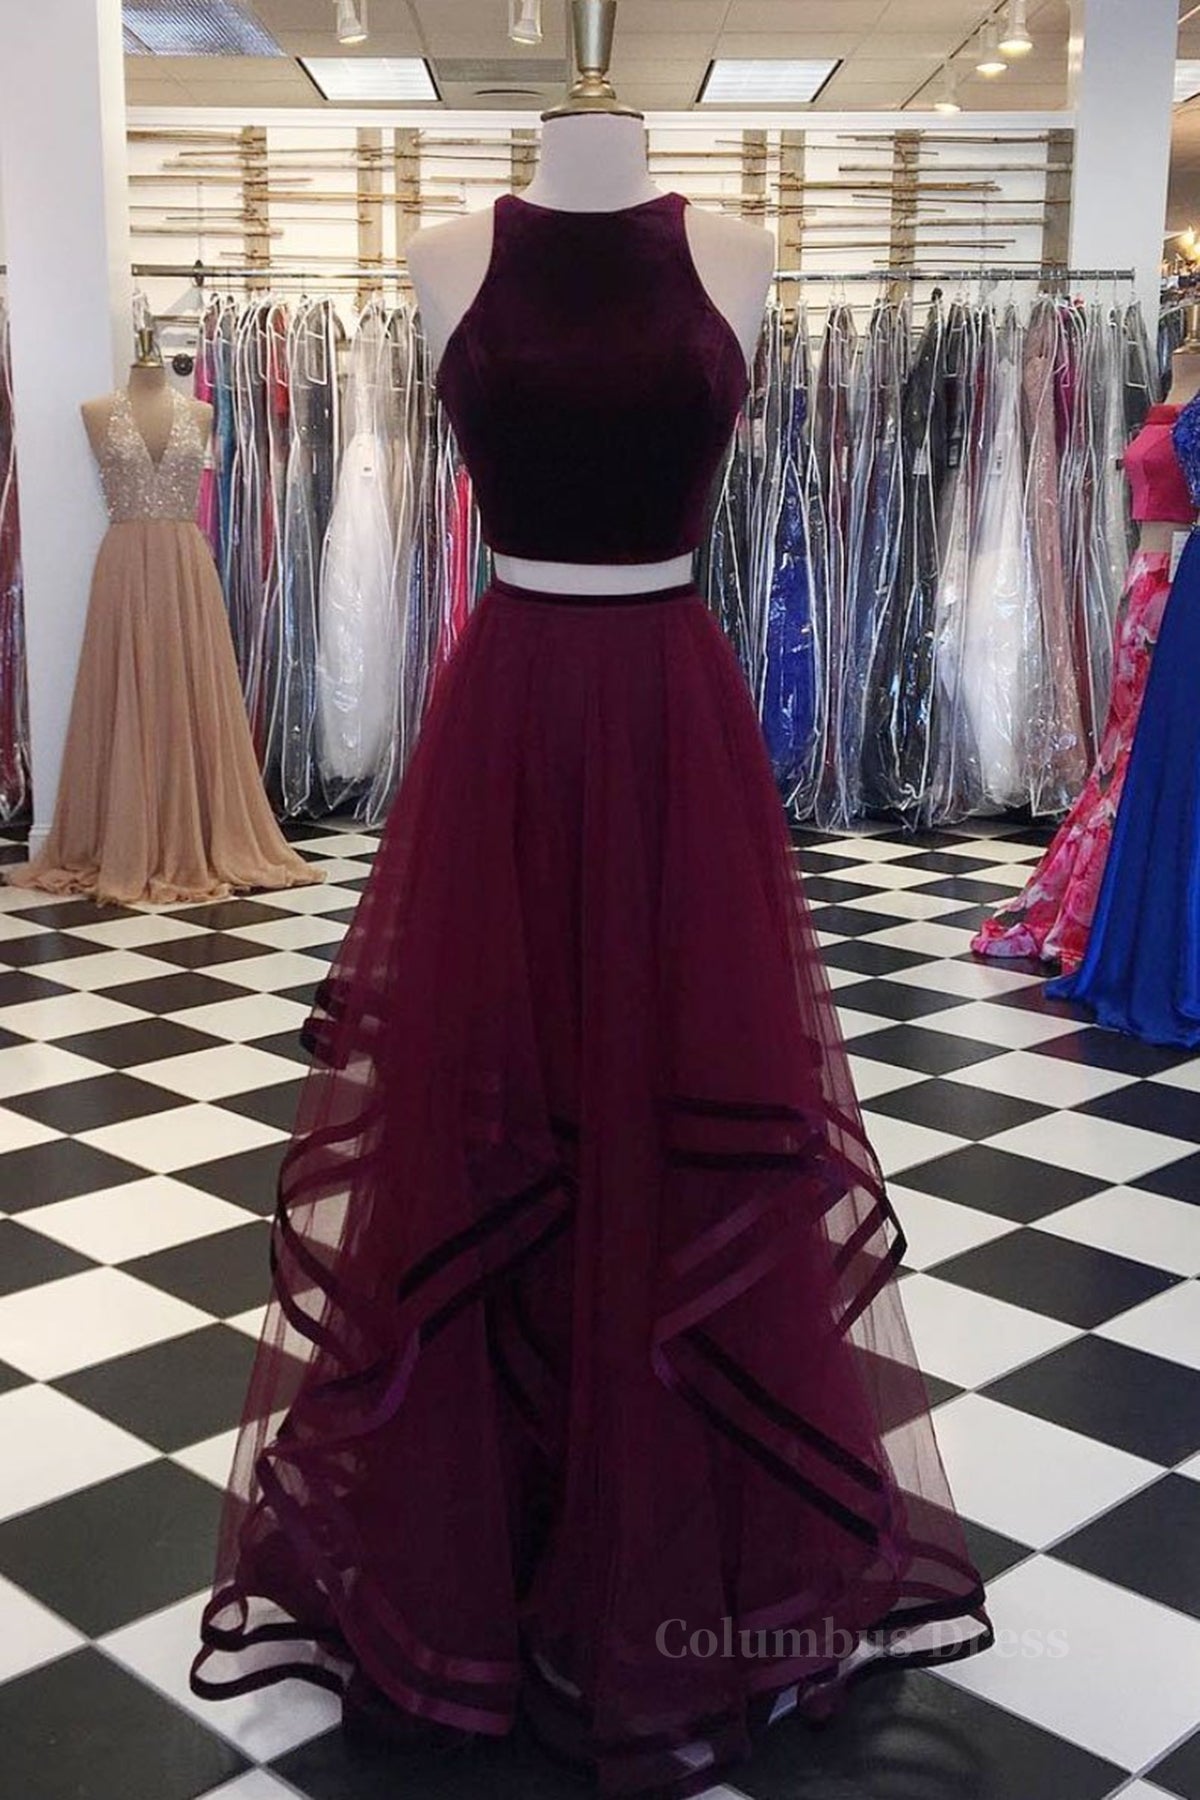 Dress Aesthetic, Two Pieces Maroon Long Prom Dress, Dark Burgundy 2 Pieces Formal Evening Dresses